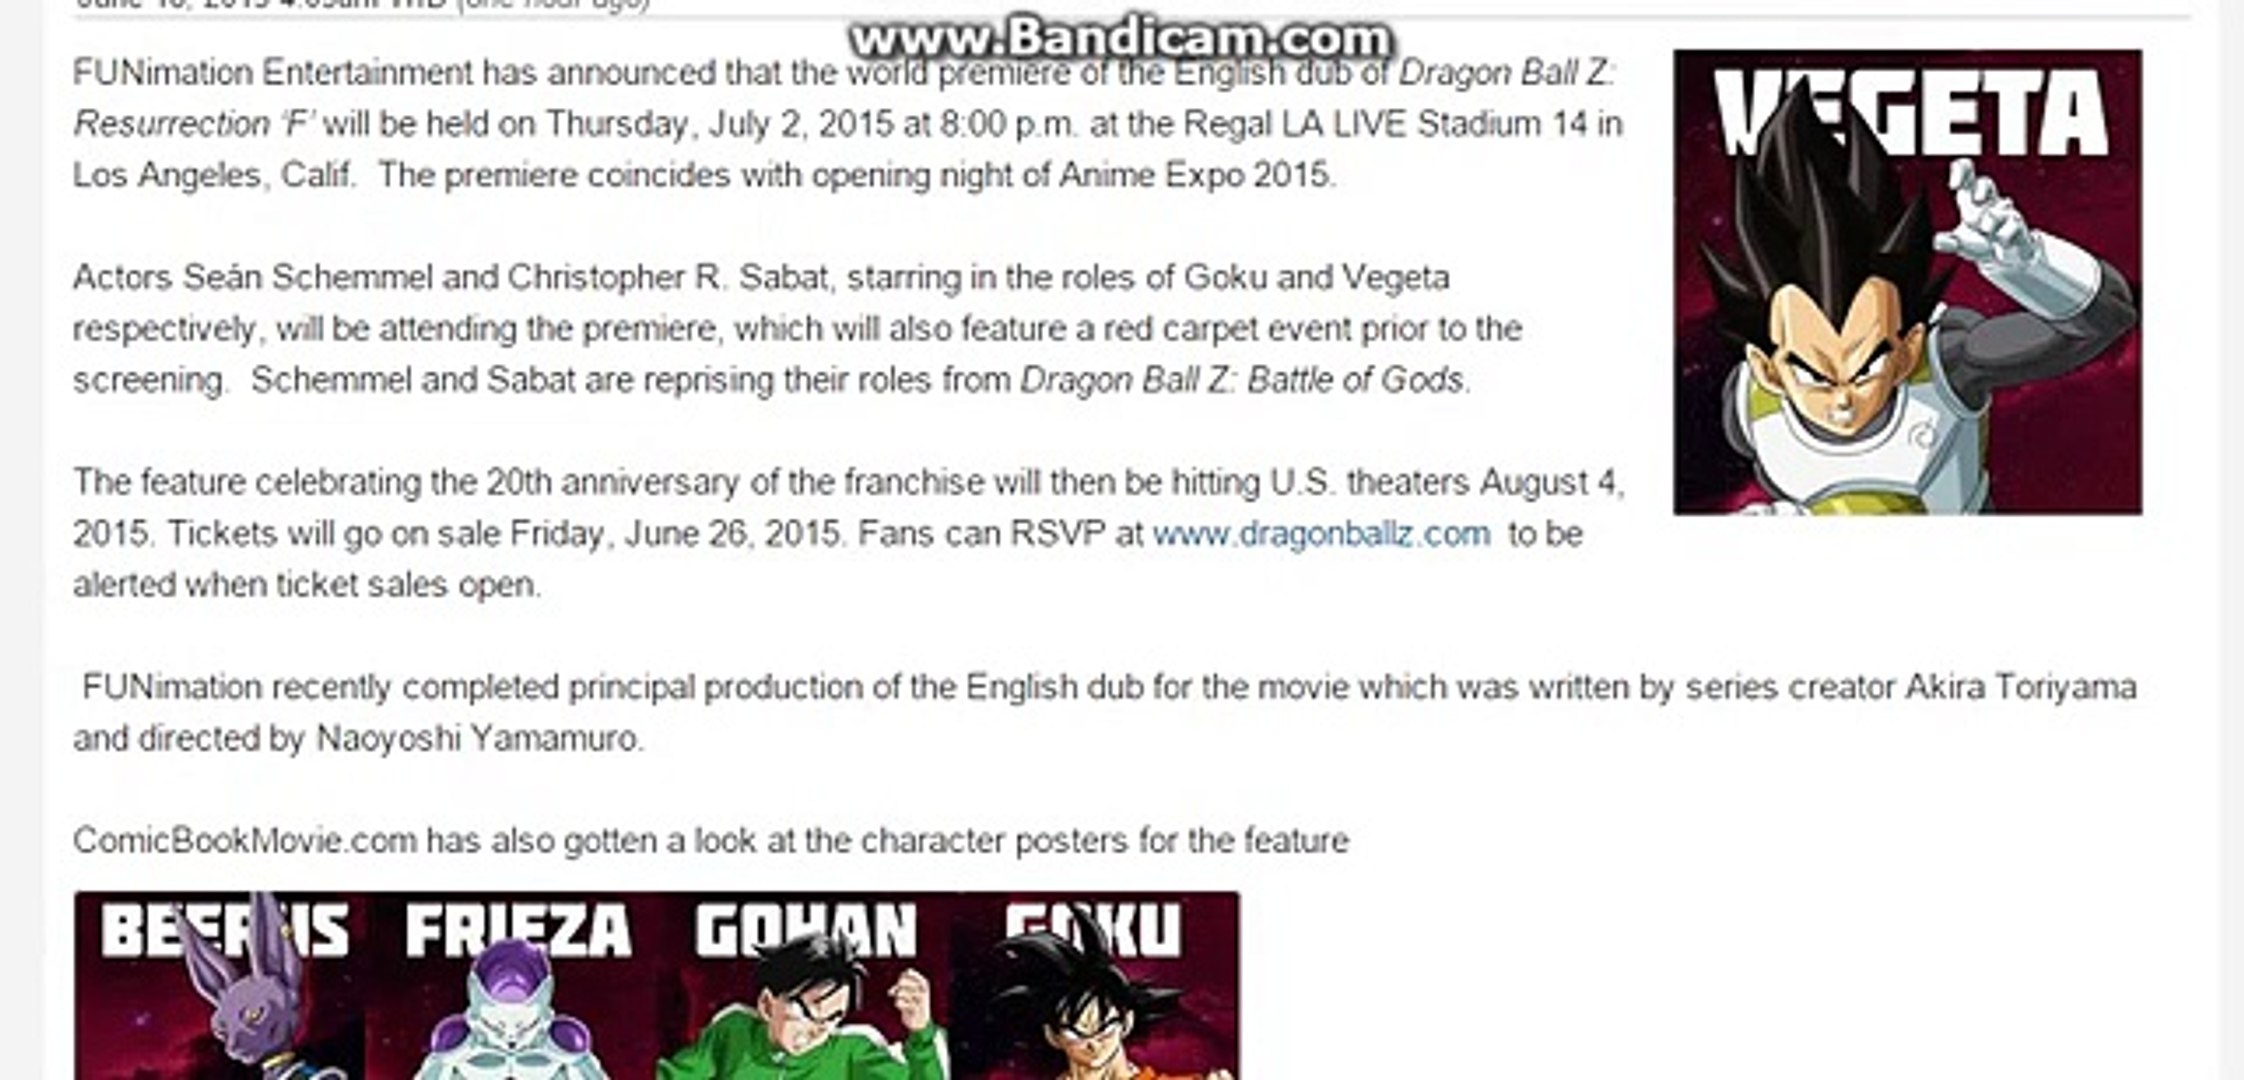 ⁣Summer Dragon Ball Z Resurrection F Screenings Launch With Anime Expo English Dub Premiere